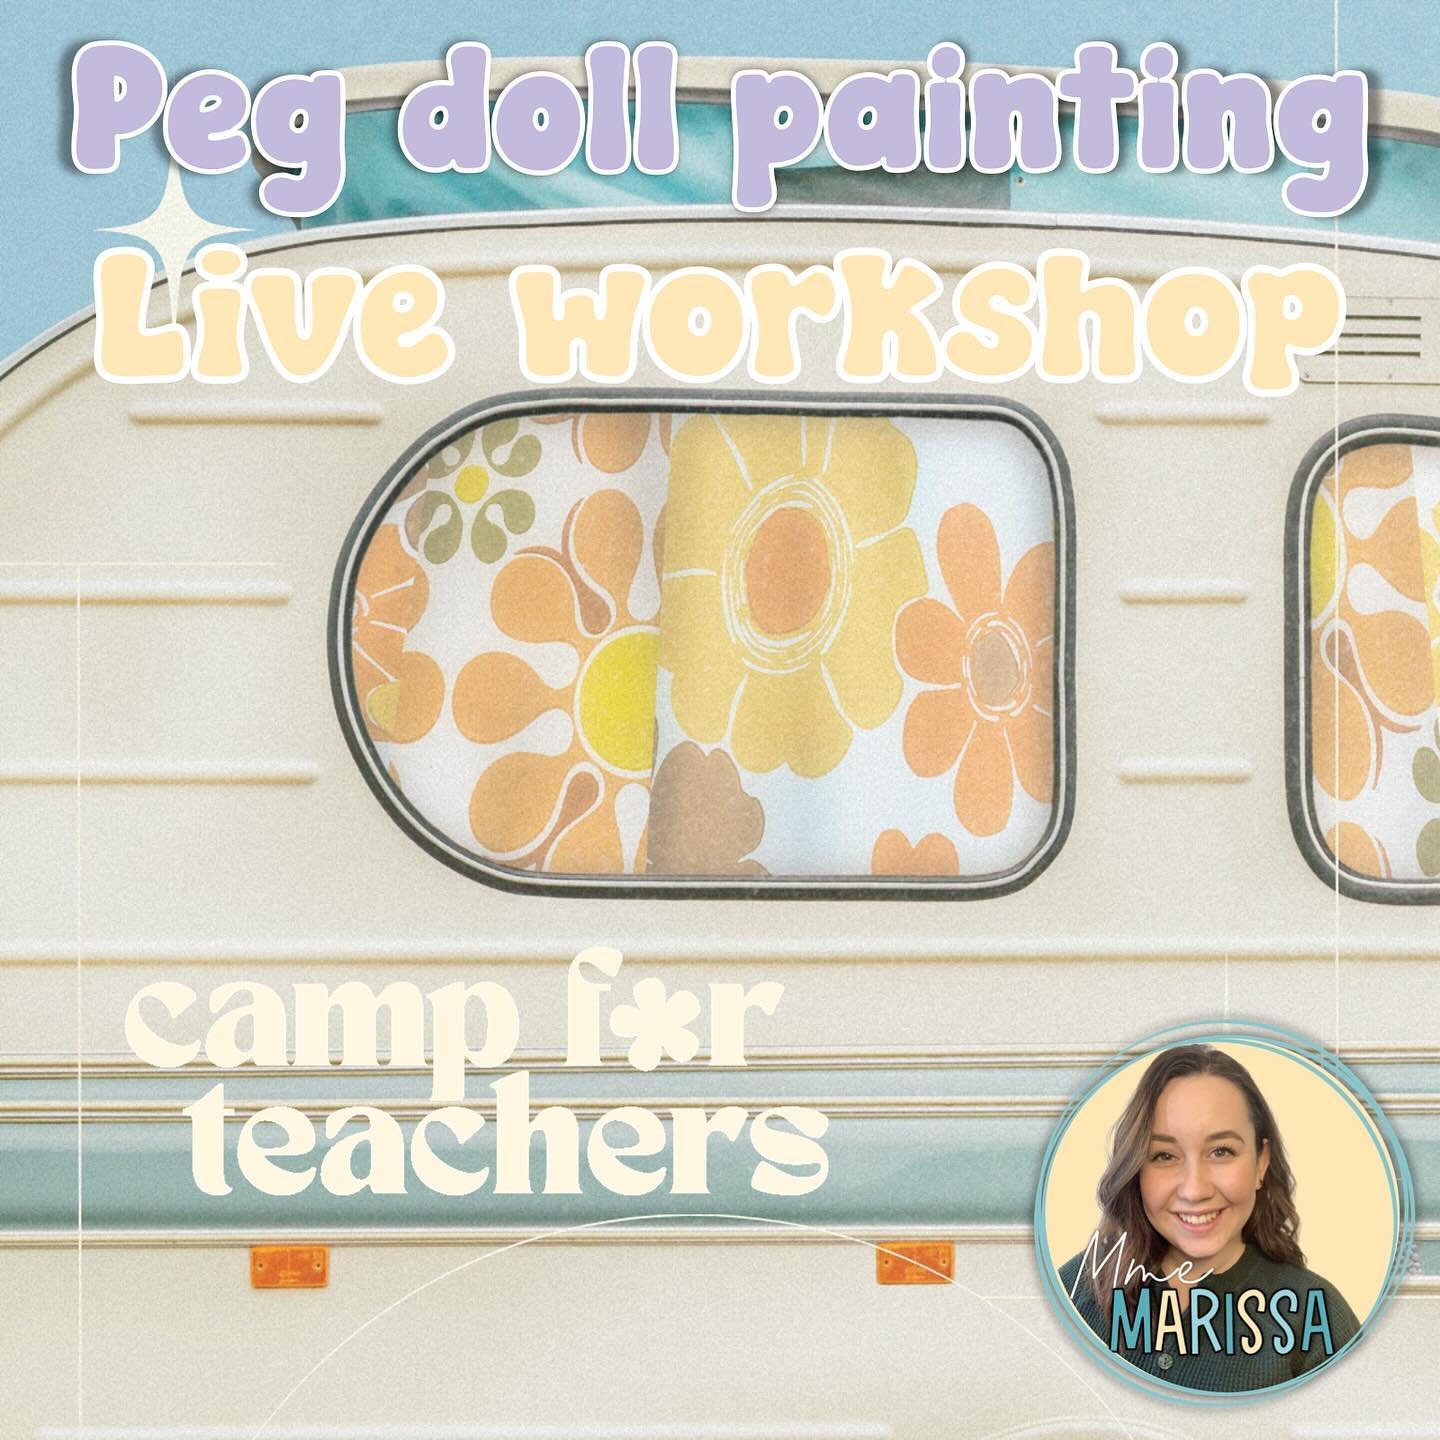 More peg doll painting? More useful professional development workshops? Sign me up! 

I am back again at @campforteachers this year to do another live workshop. I&rsquo;ll be teaching you how to paint more peg dolls. If you didn&rsquo;t get a chance 